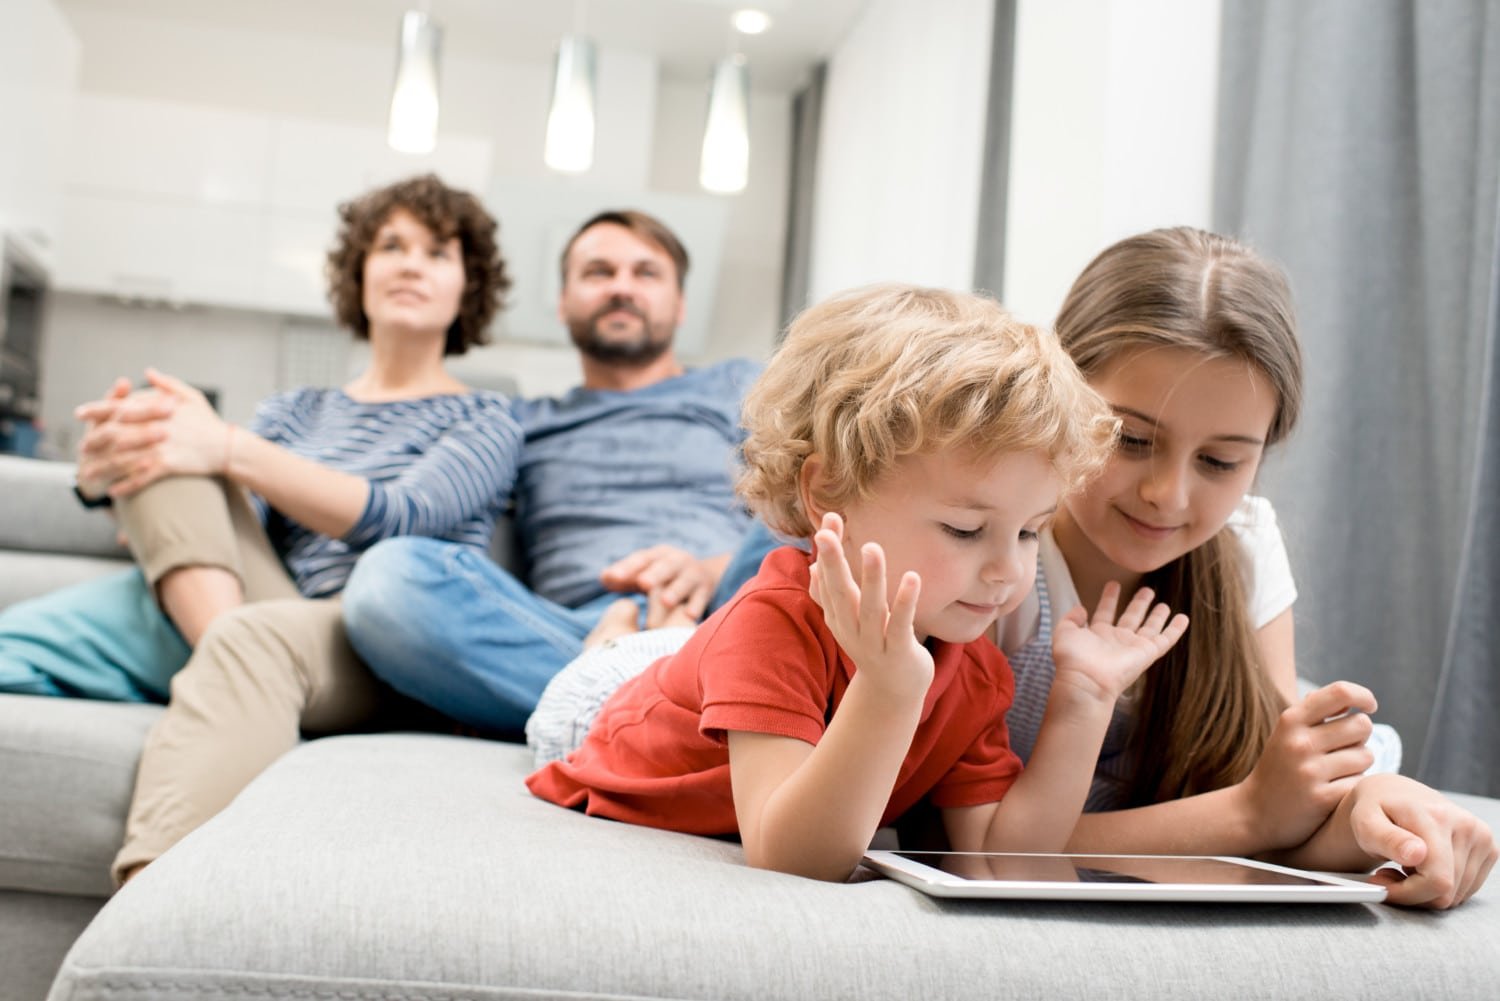 https://www.simplemost.com/why-parents-should-stop-feeling-so-guilty-about-their-kids-watching-tv/